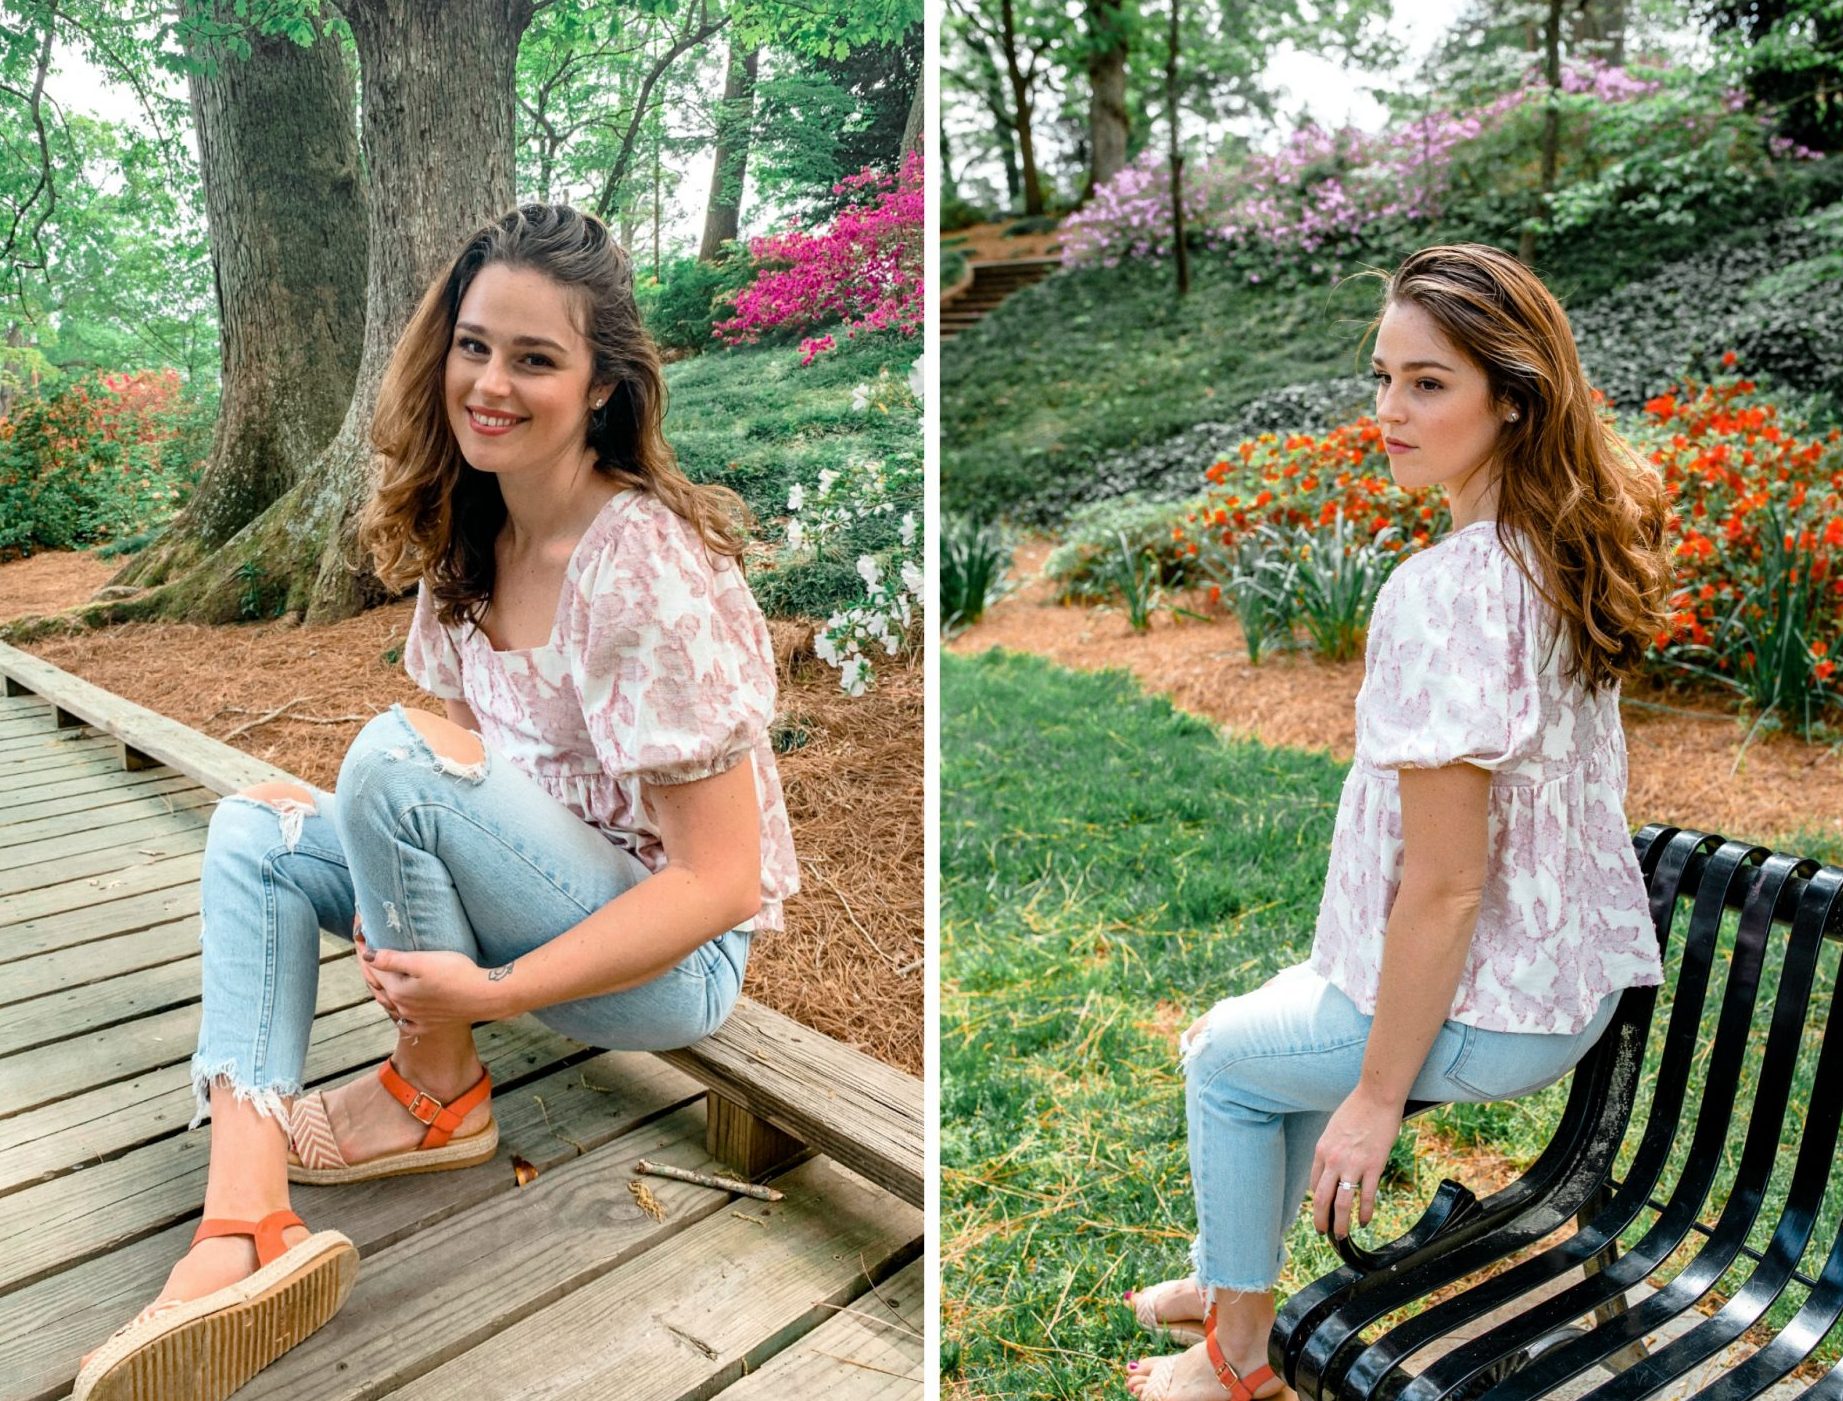 Photo, Presets, Blogger photos, how to edit like a blogger, blog photos, how to edit photos, photography tips, what camera to buy, what lens, what camera do I use, how do you edit your photos, photography tips